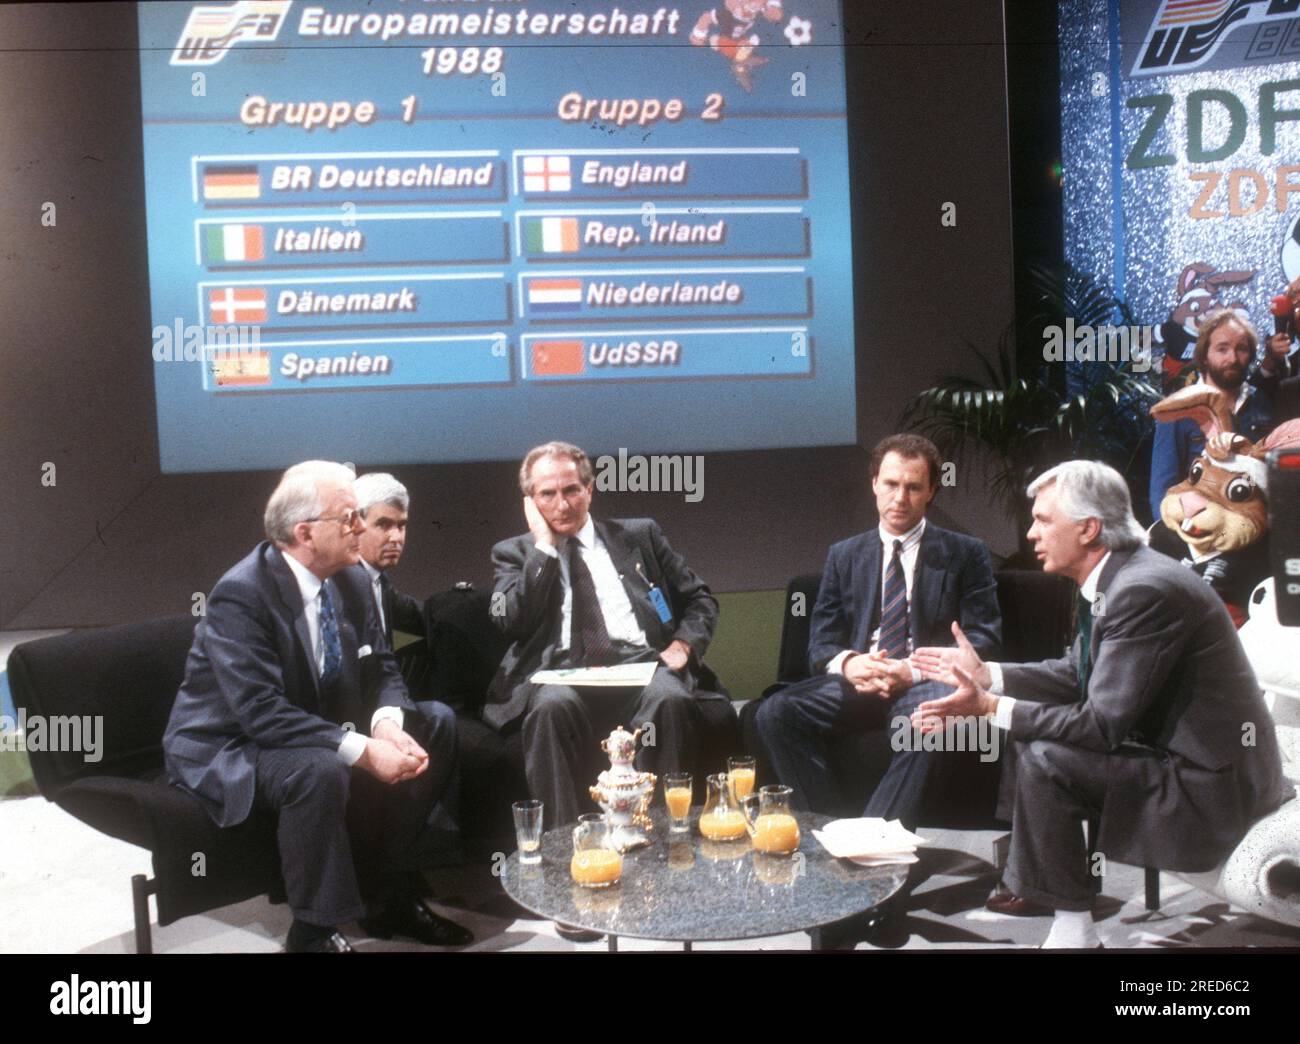 European Championship 1988 in Germany. Draw of the final round in Düsseldorf 12.02.1988. / from left : DFB President Hermann Neuberger , Coach Azeglio Vicini (Italy), Franz Beckenbauer and ZDF - Moderator Dieter Kürten in front of the board with the EM - groups. [automated translation] Stock Photo